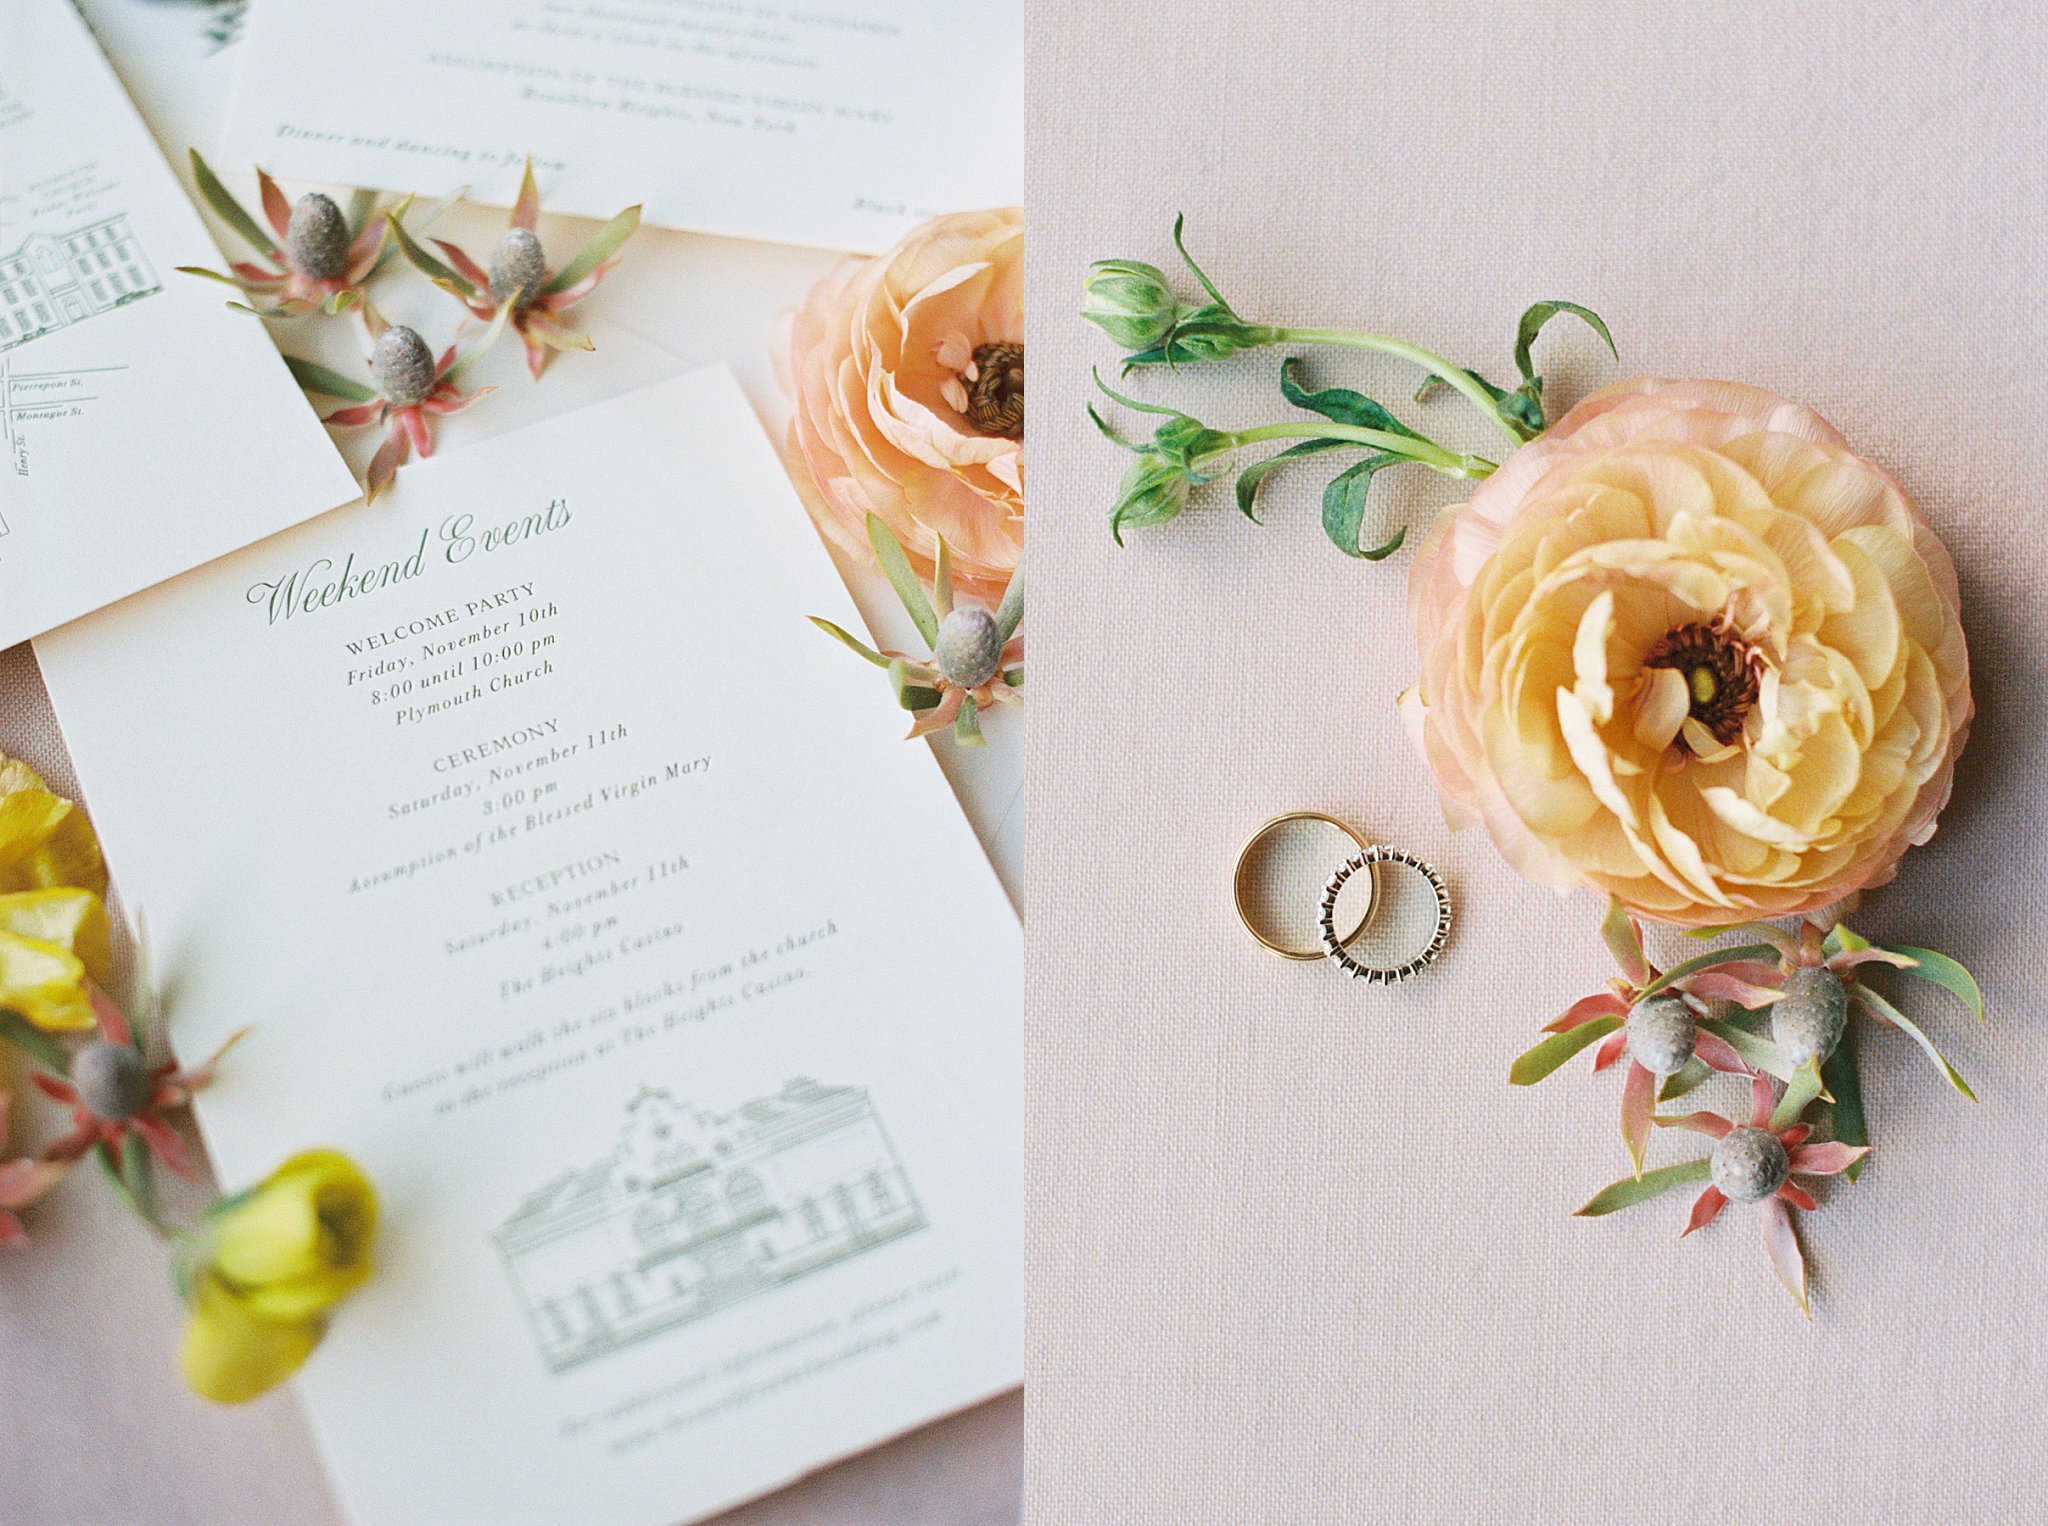 invitations set out by florals and rings by Lynne Reznick Photography